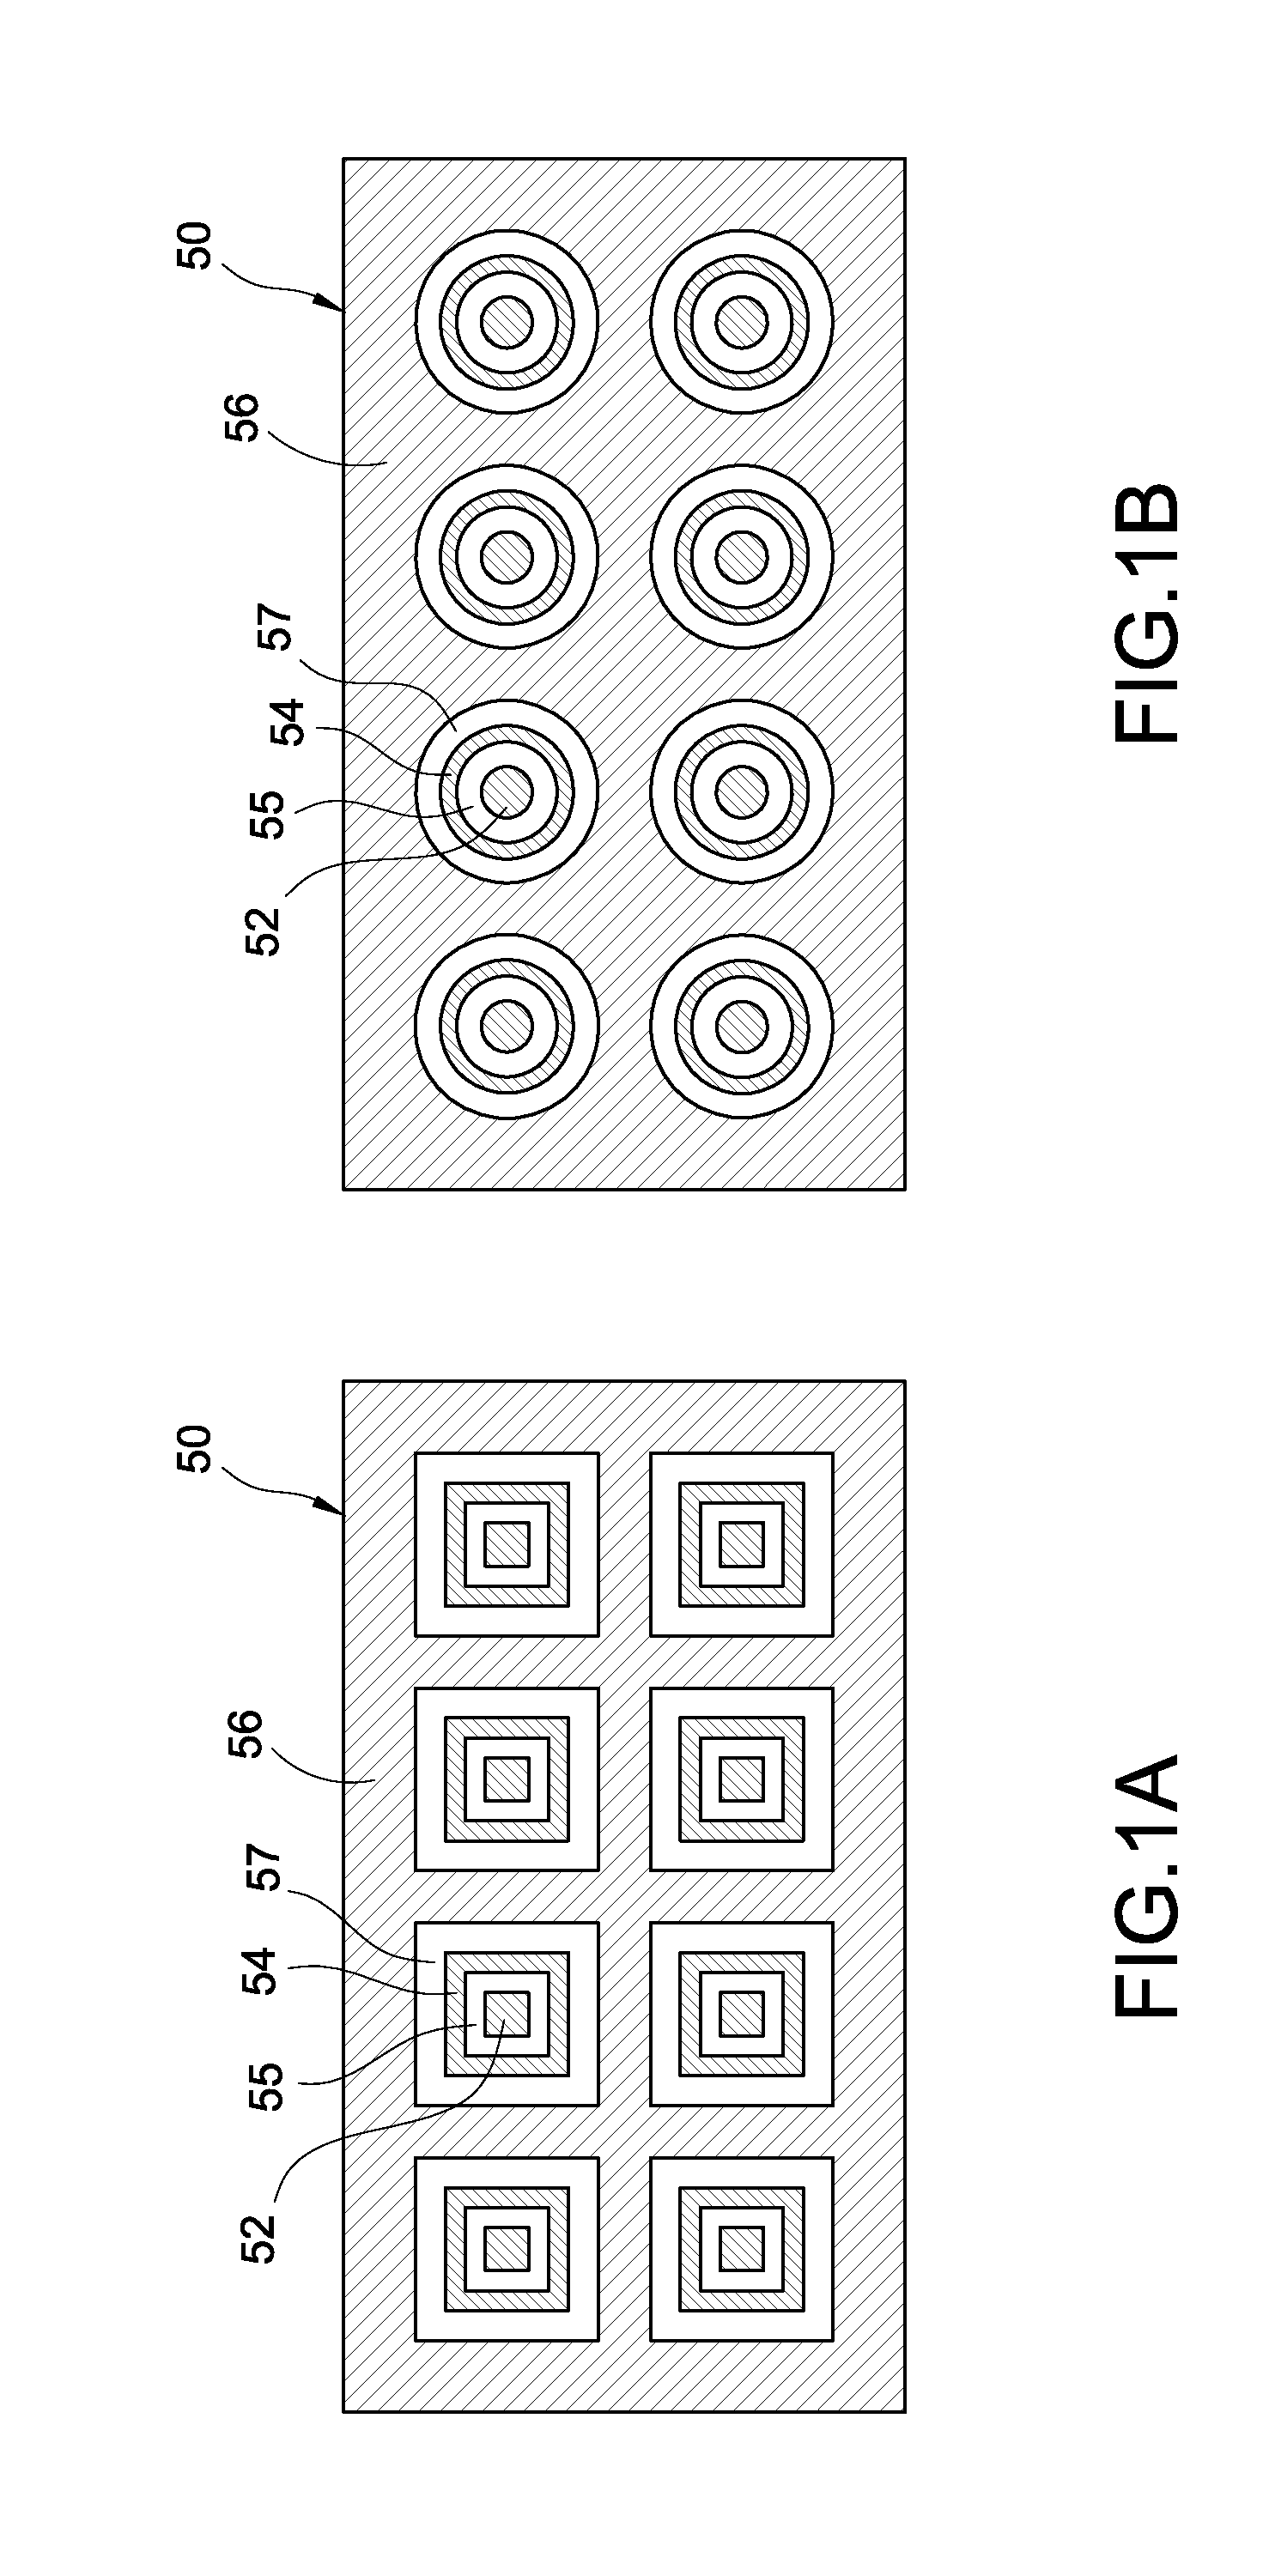 Biometric recognition apparatus with deflection electrode